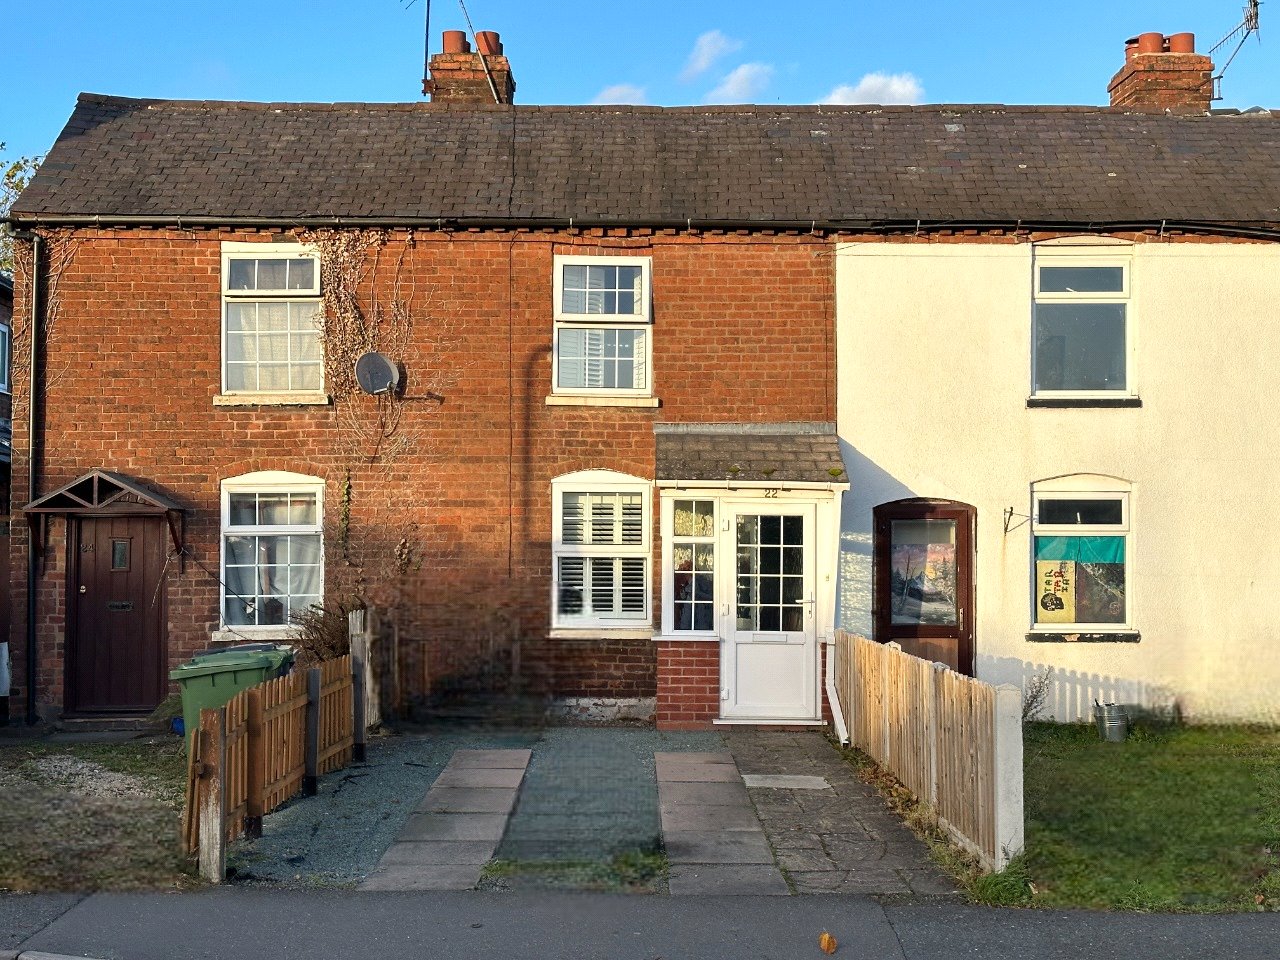 Lickhill Road, Stourport-on-Severn, Worcestershire, DY13